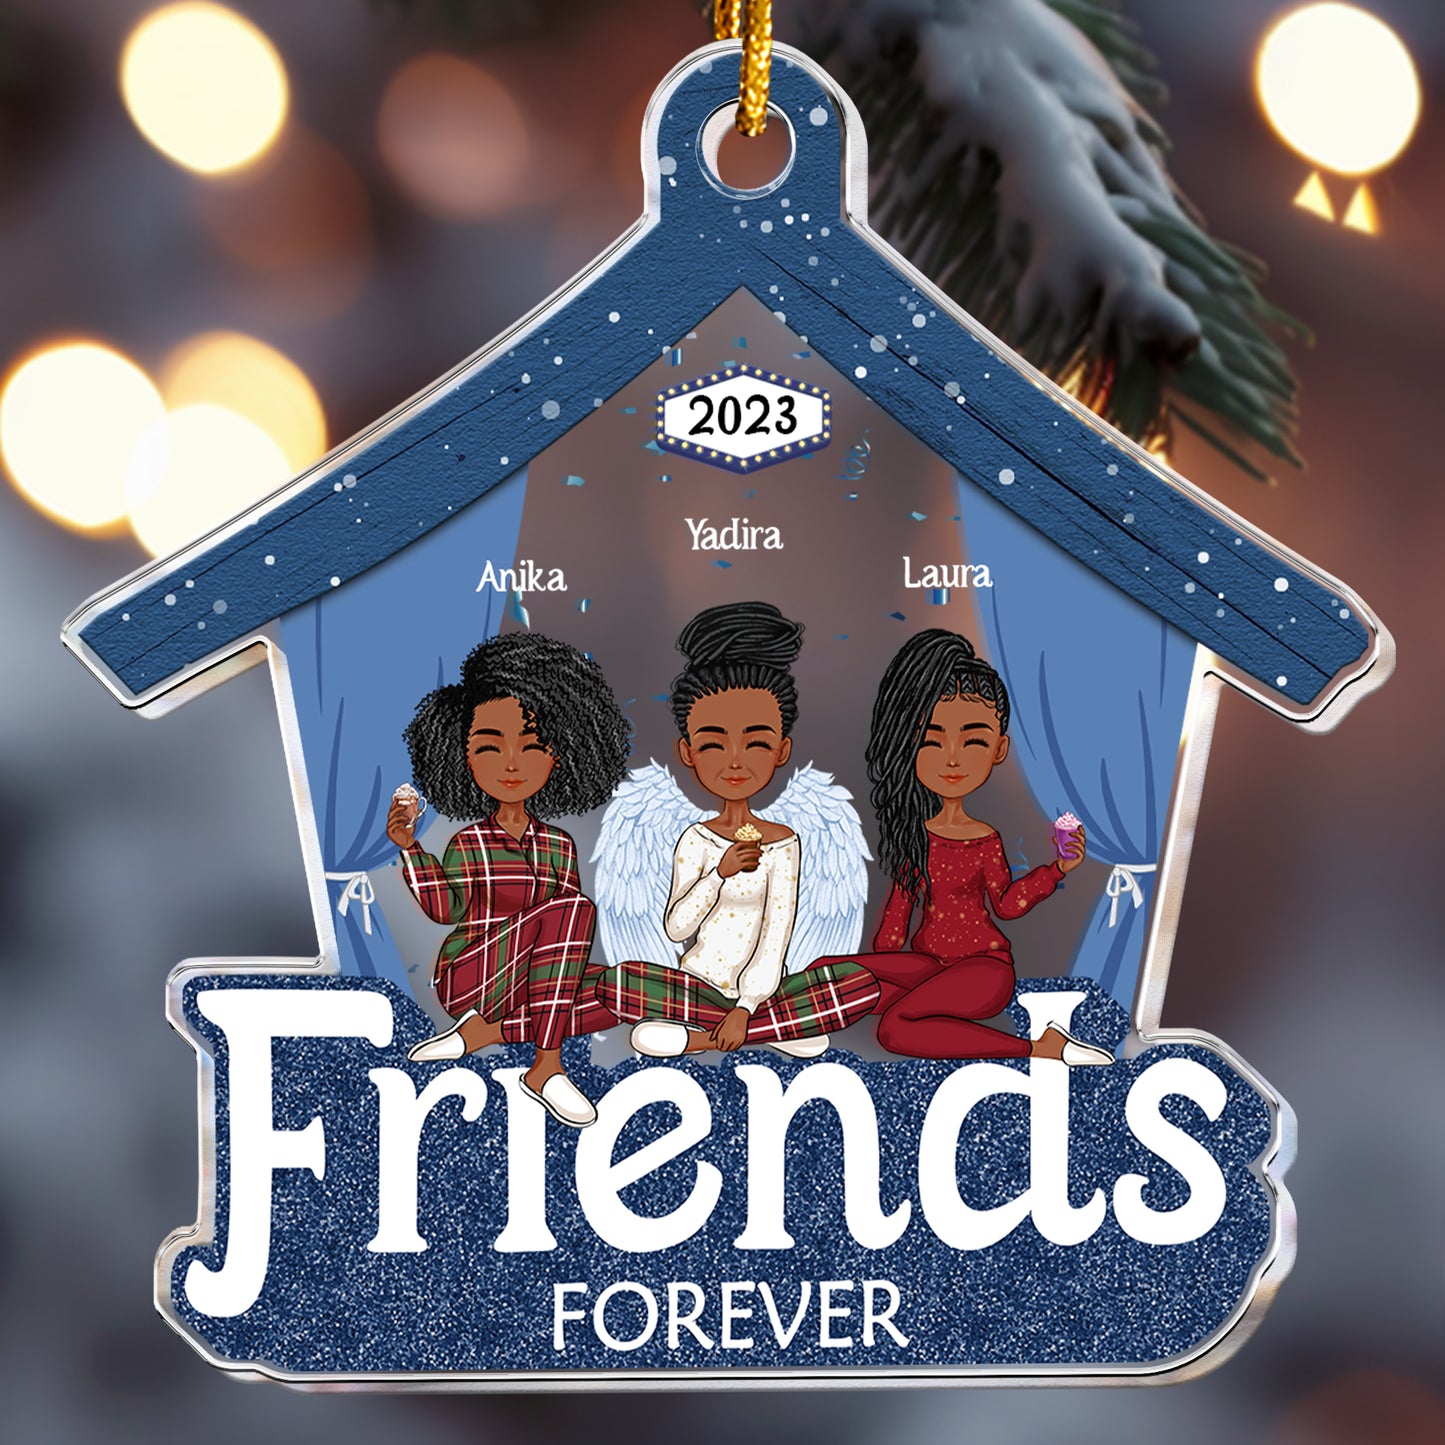 Friends - Besties Forever - Personalized Acrylic Ornament